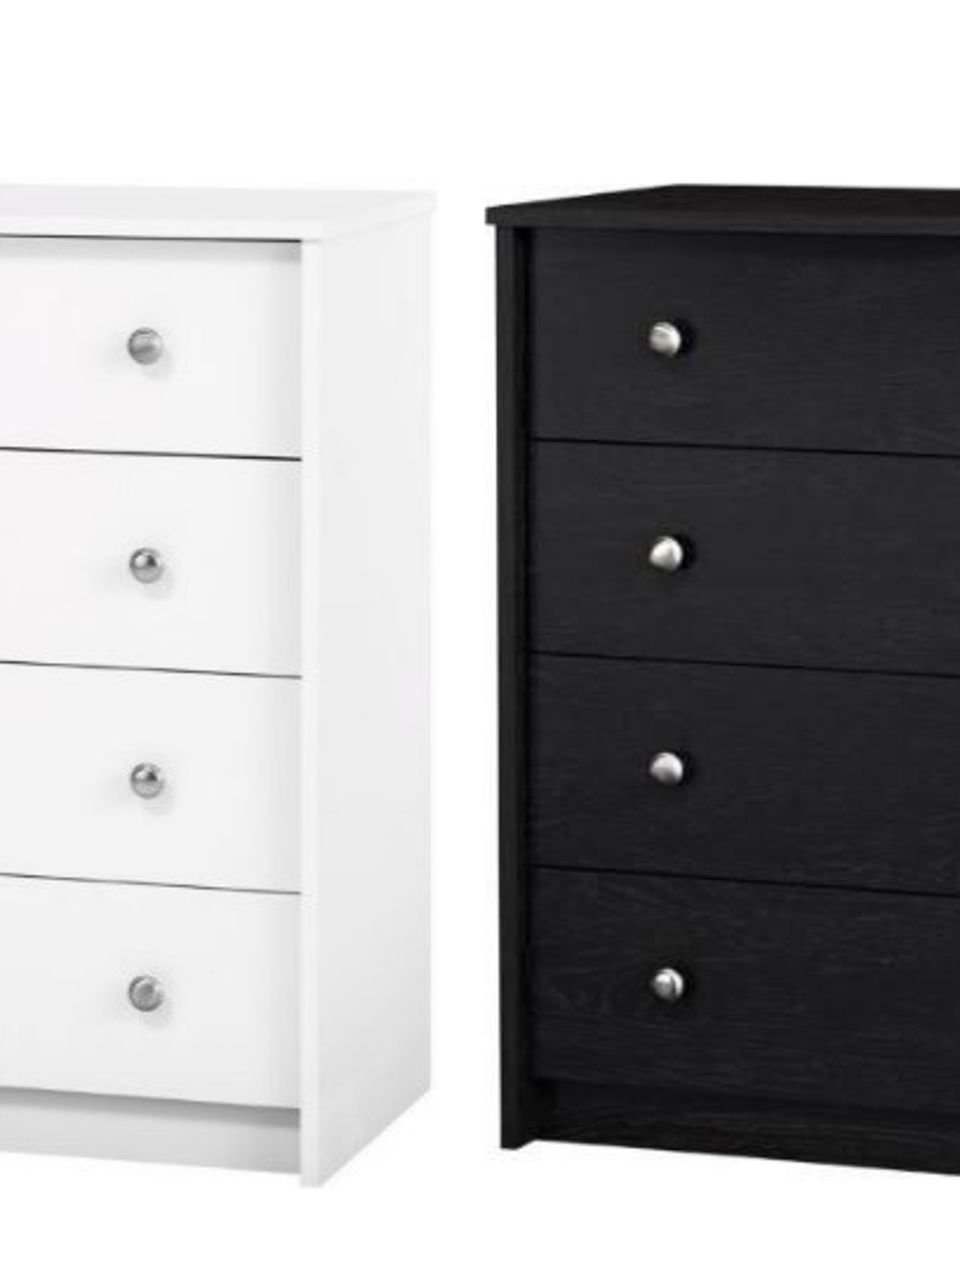 1 Million Dressers Sold At Kmart Recalled Due To Tip Over